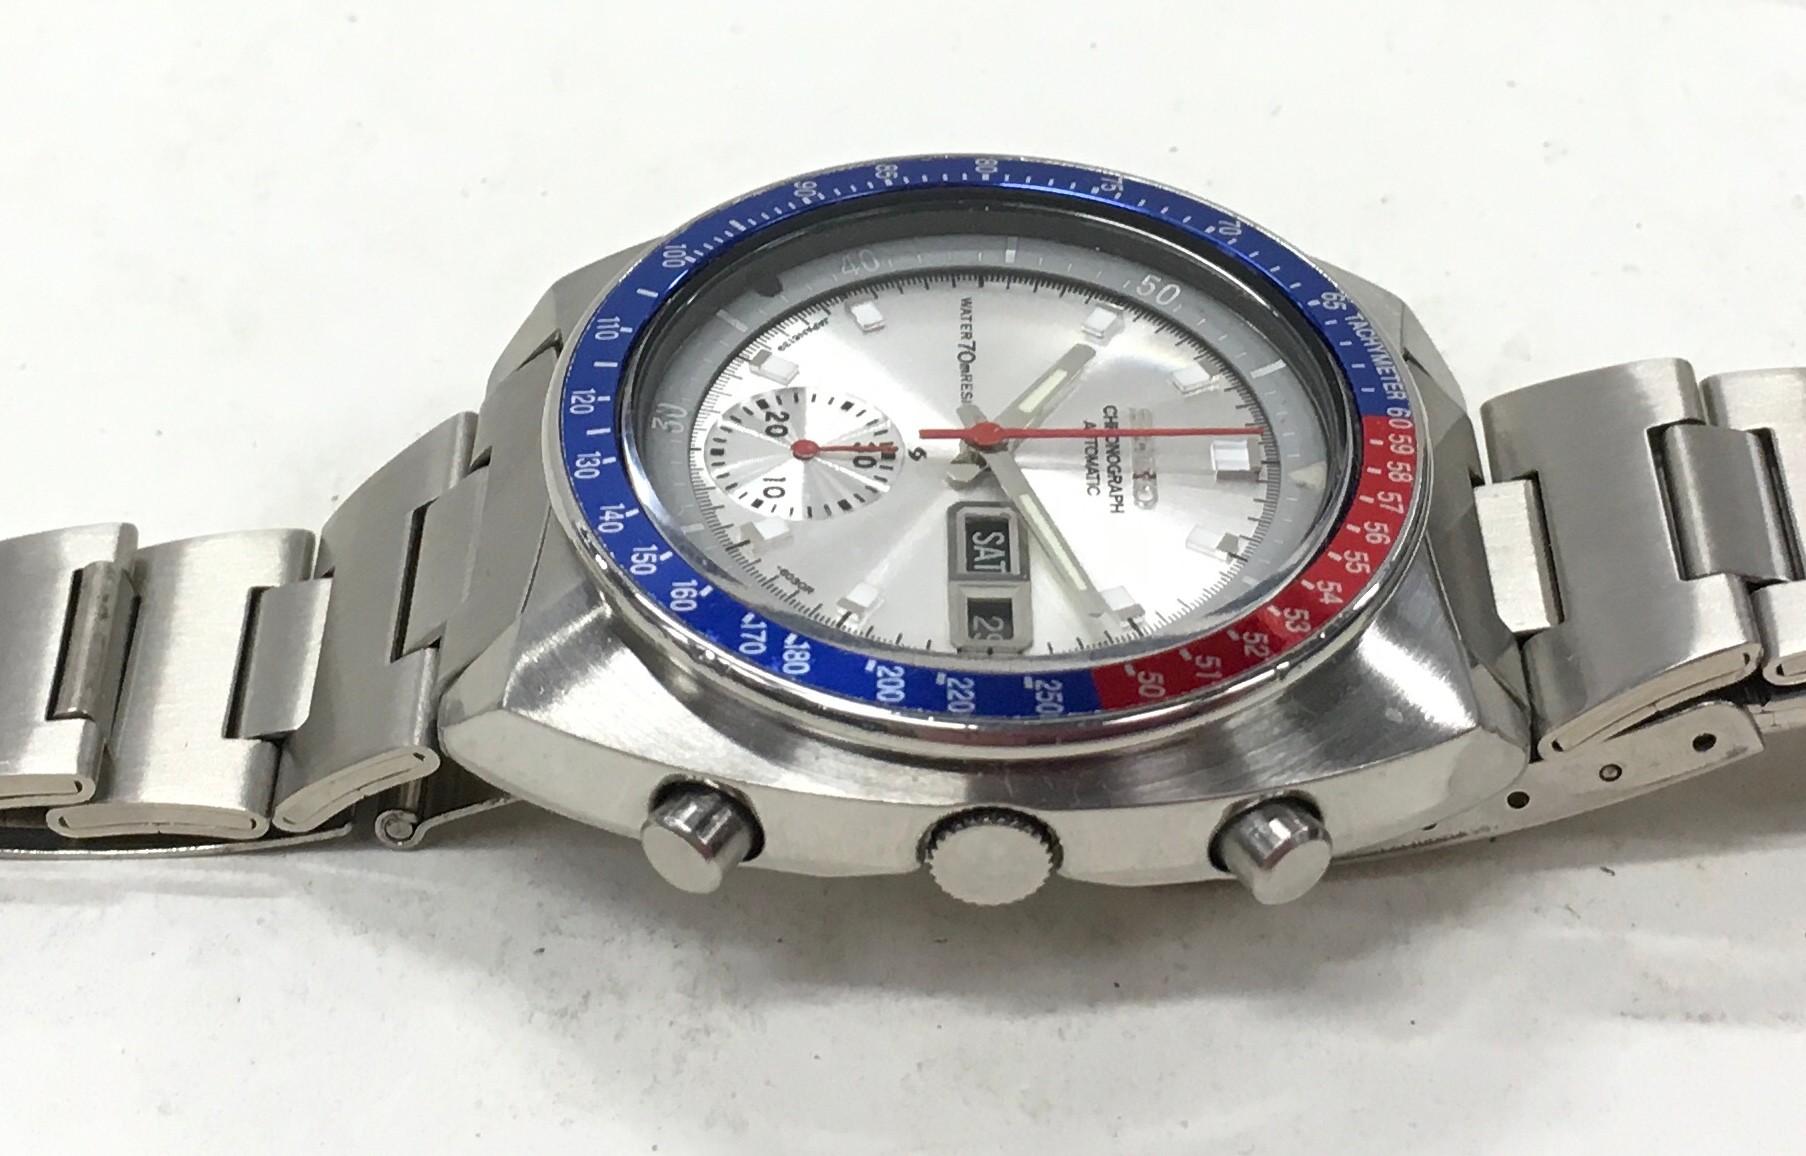 Vintage Seiko 'Silver Pogue' gents automatic watch with Pepsi bezel. Model number 6139-6002. - Image 3 of 4